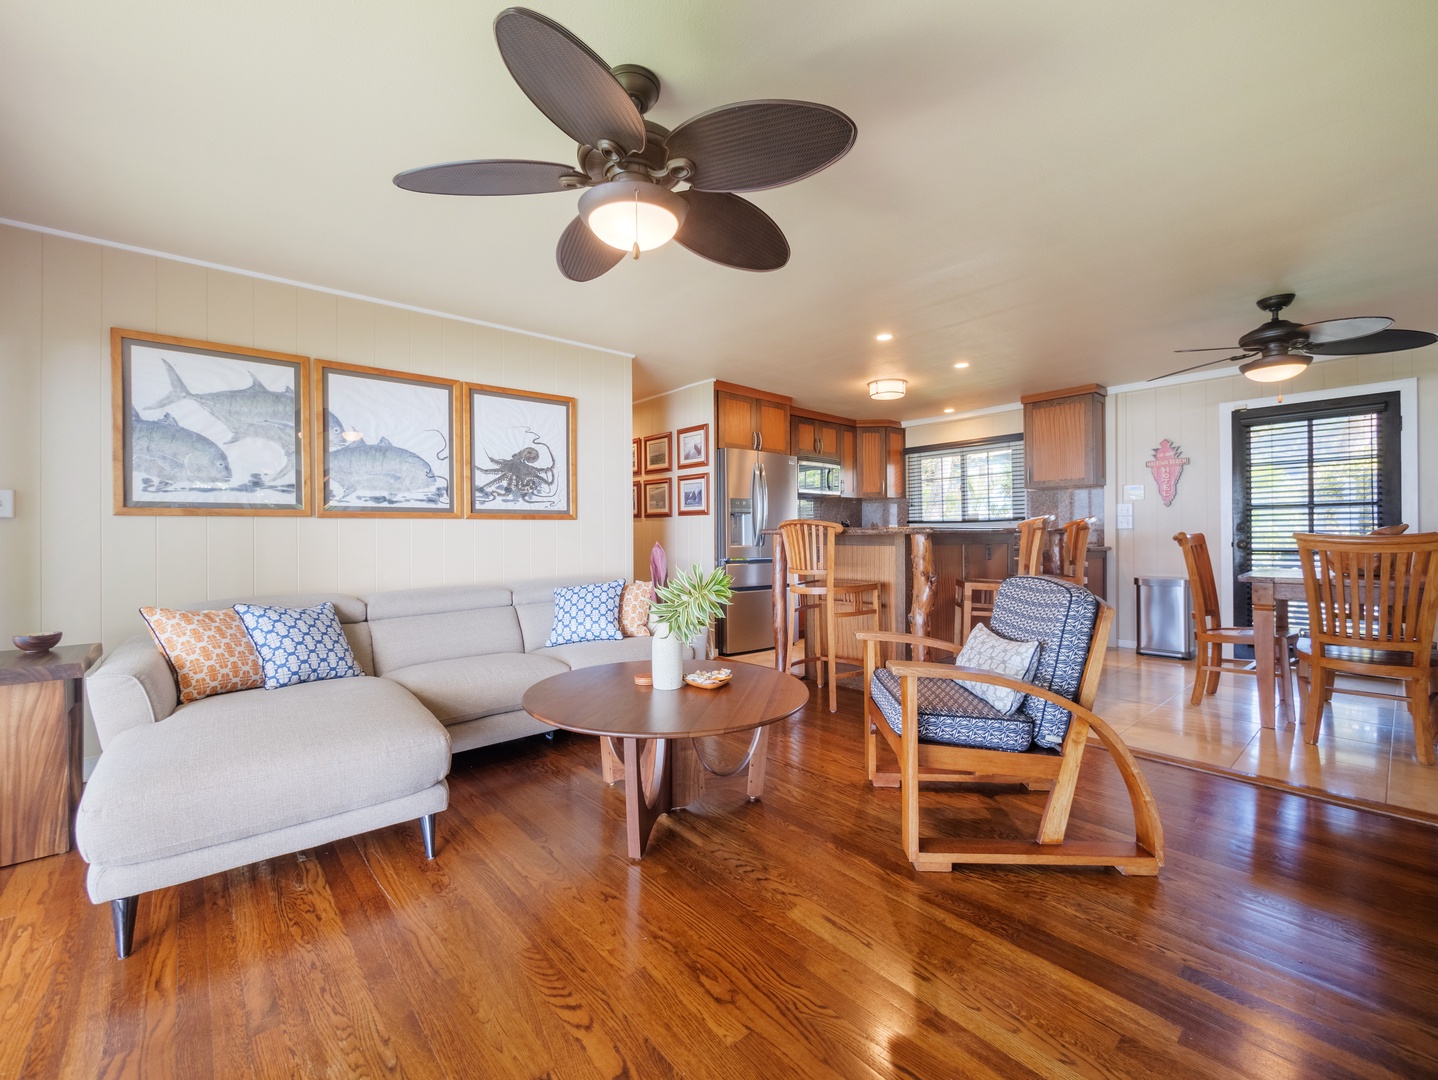 Haleiwa Vacation Rentals, Sunset Point Hawaiian Beachfront** - Comfy sofas in the living area, a perfect spot to gather for family time.